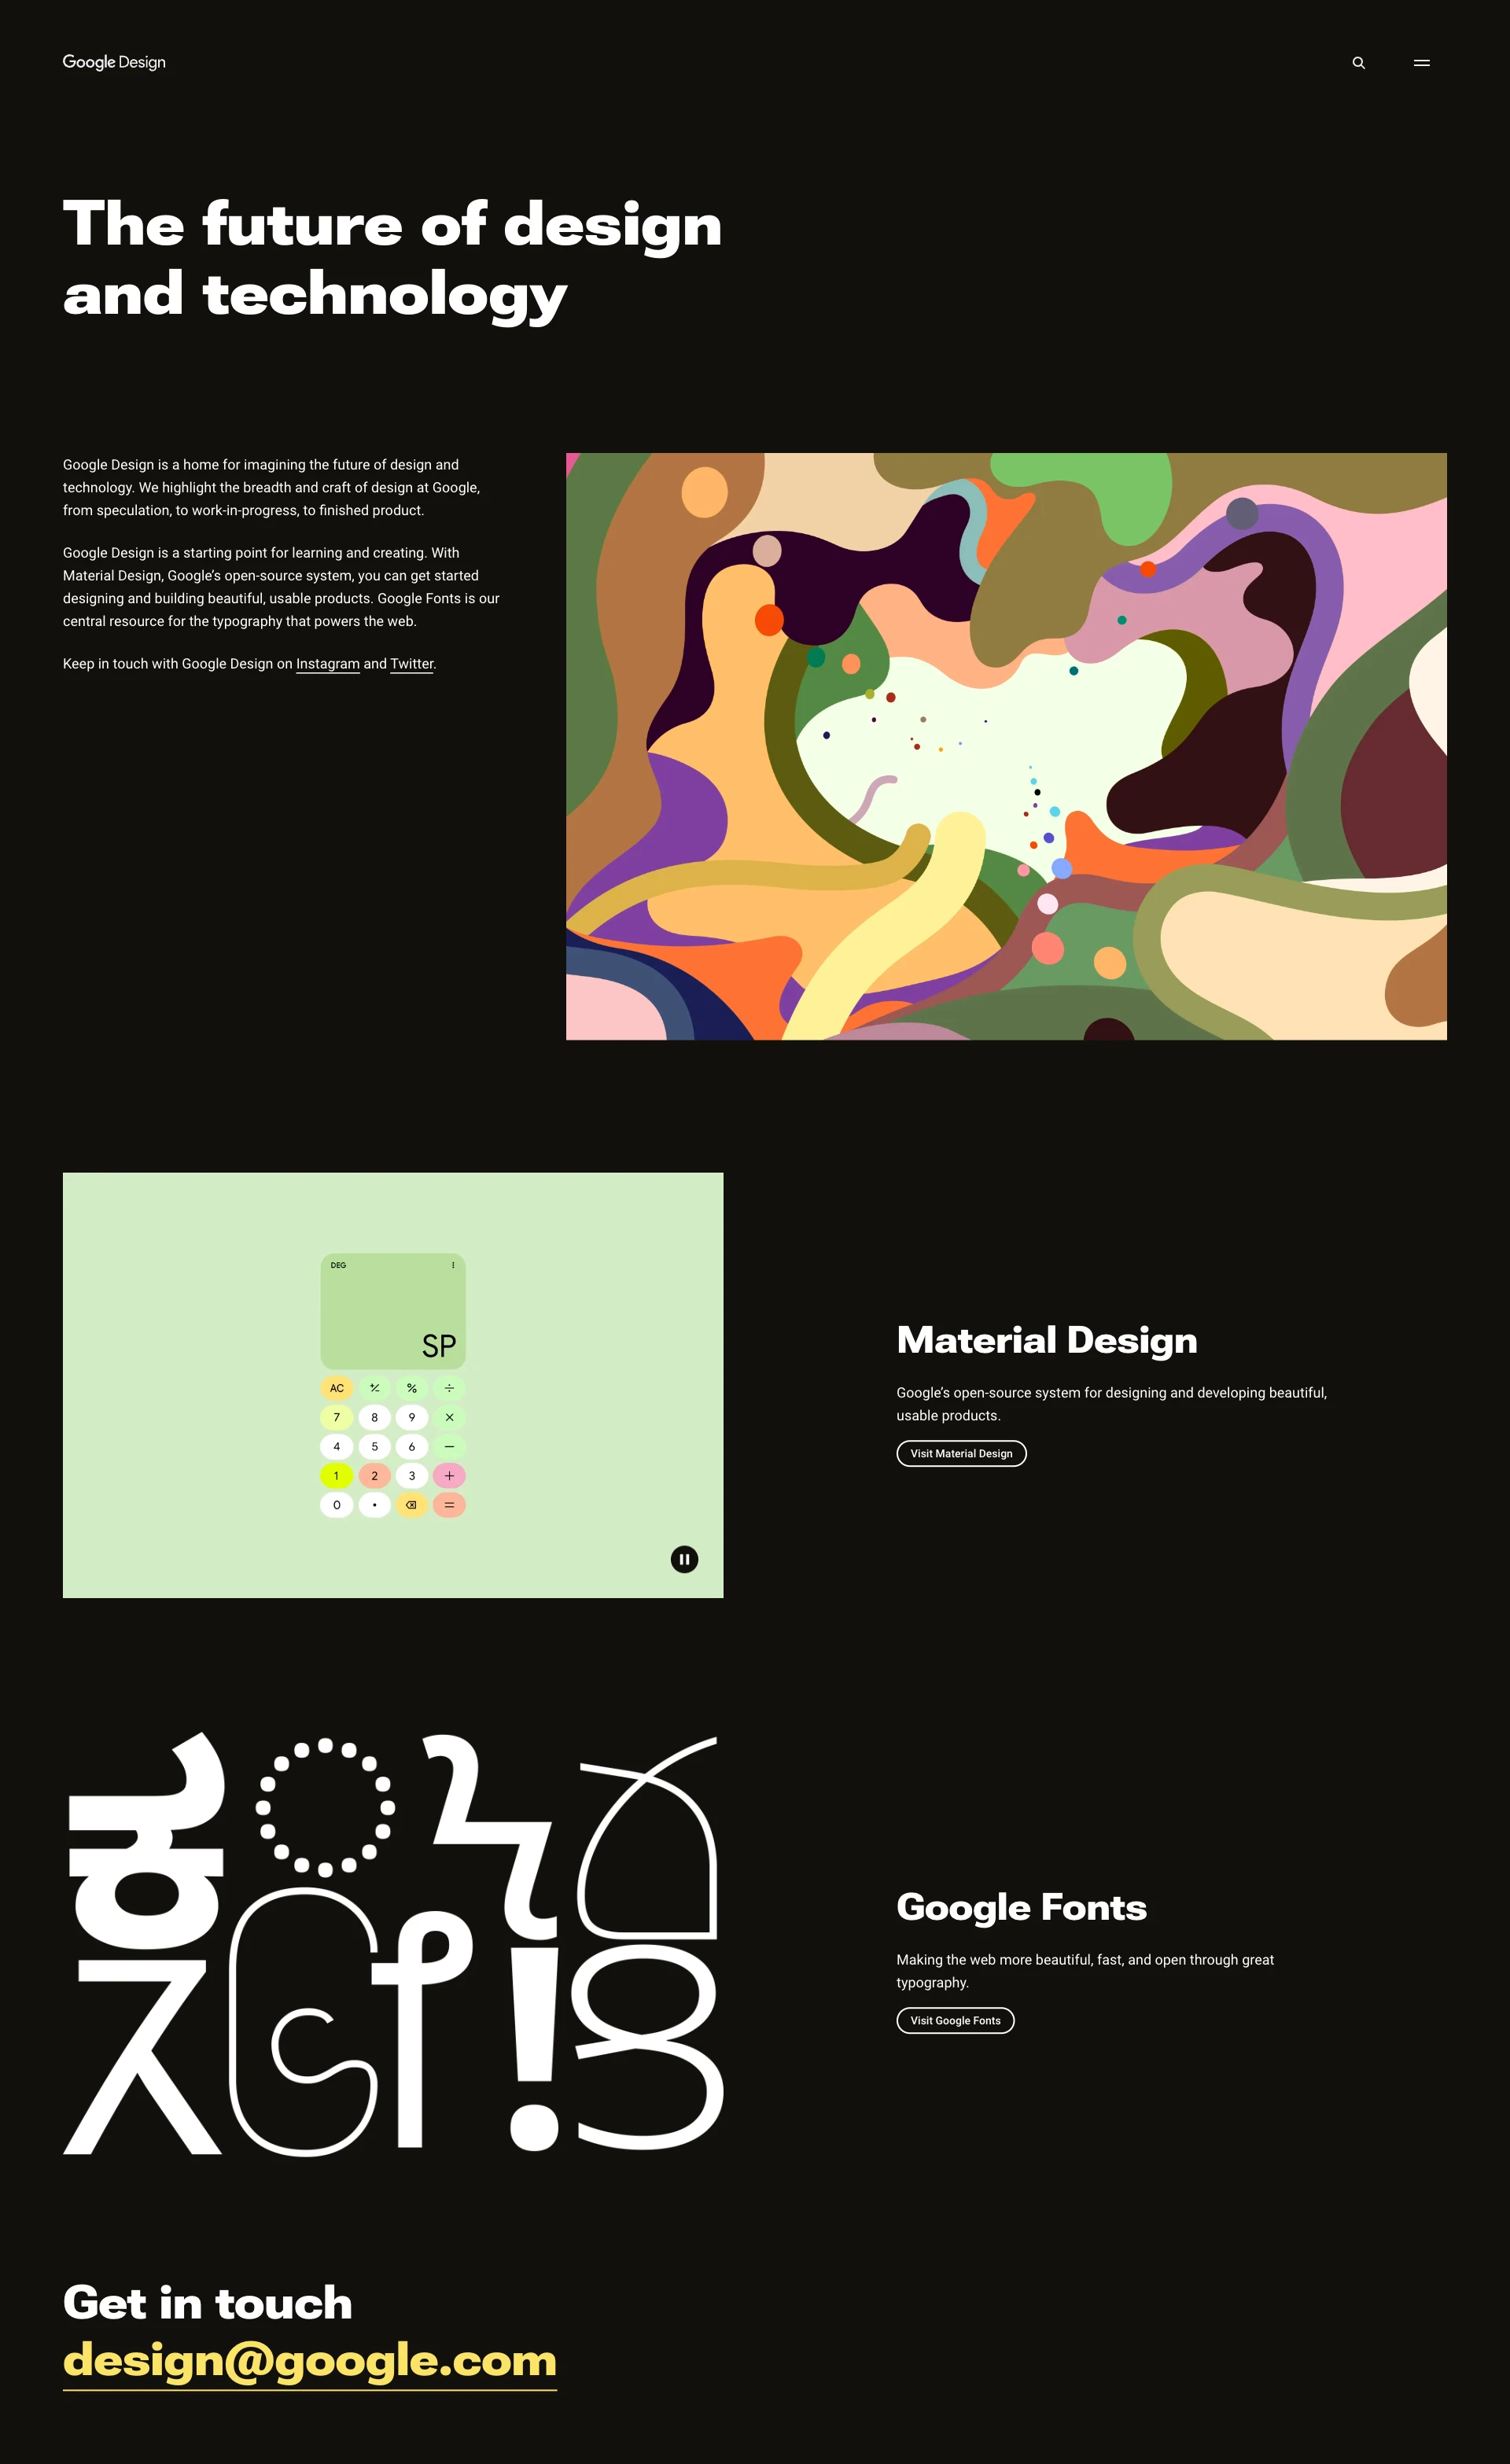 Google Design Landing Page Example: Google Design is the home for inspiration and insights that move Google's product design forward. Get to know the breadth and craft of design and technology at Google.